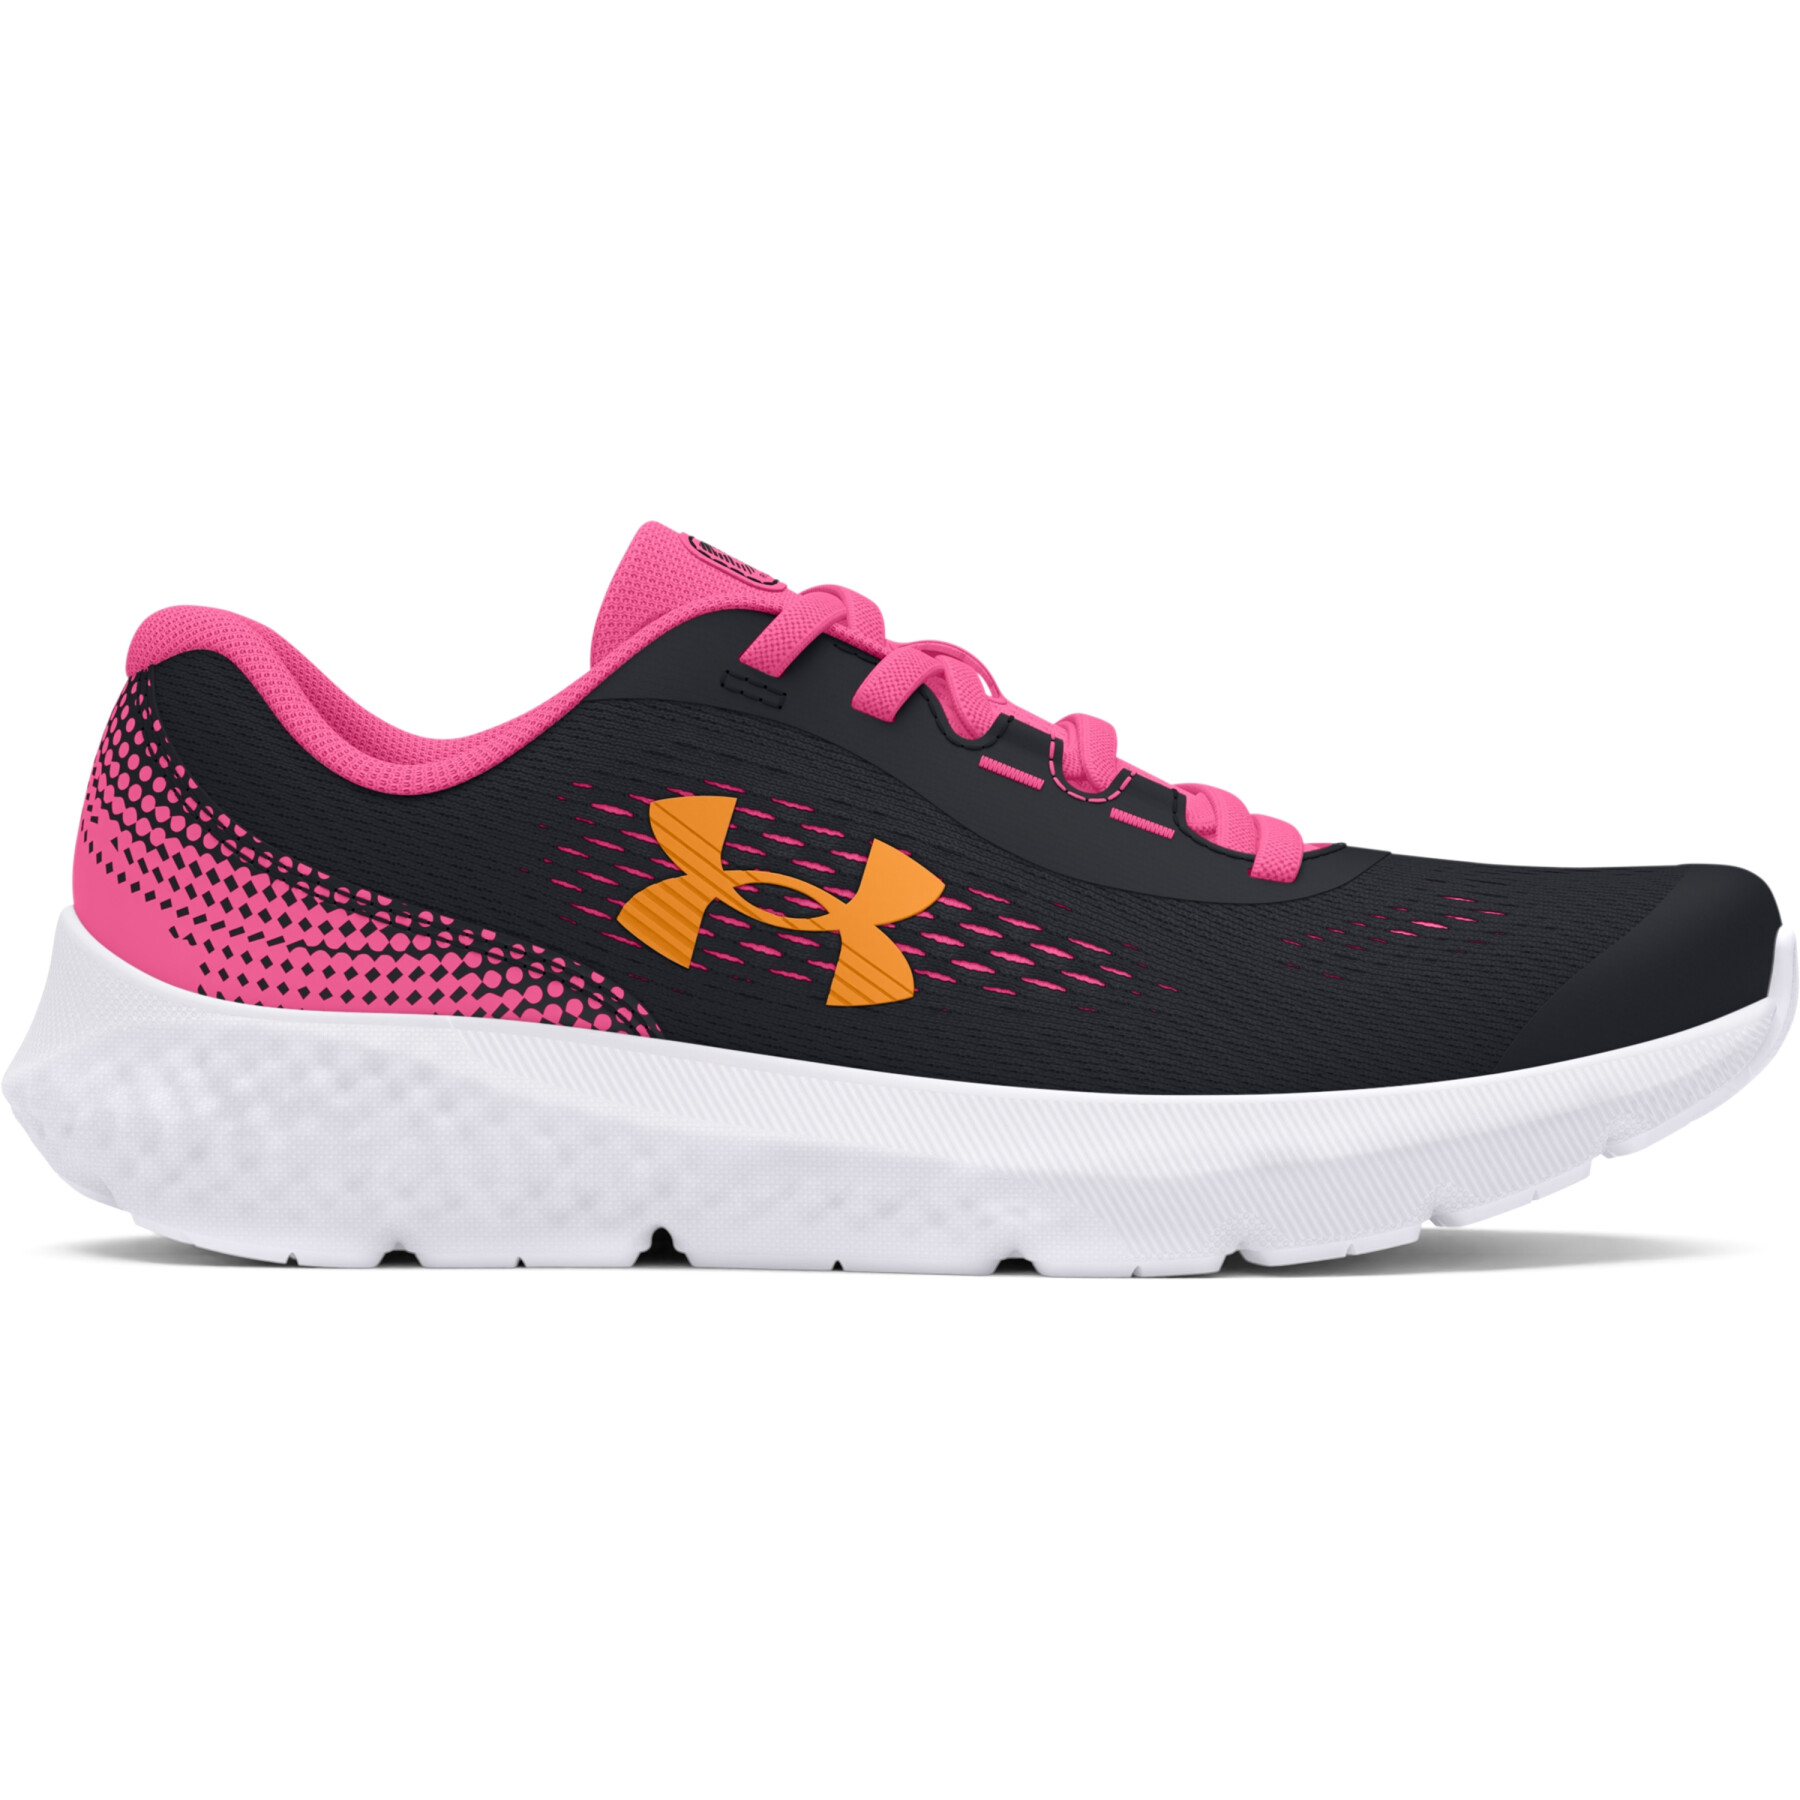 Girls' running shoes Under Armour Rogue 4 AL